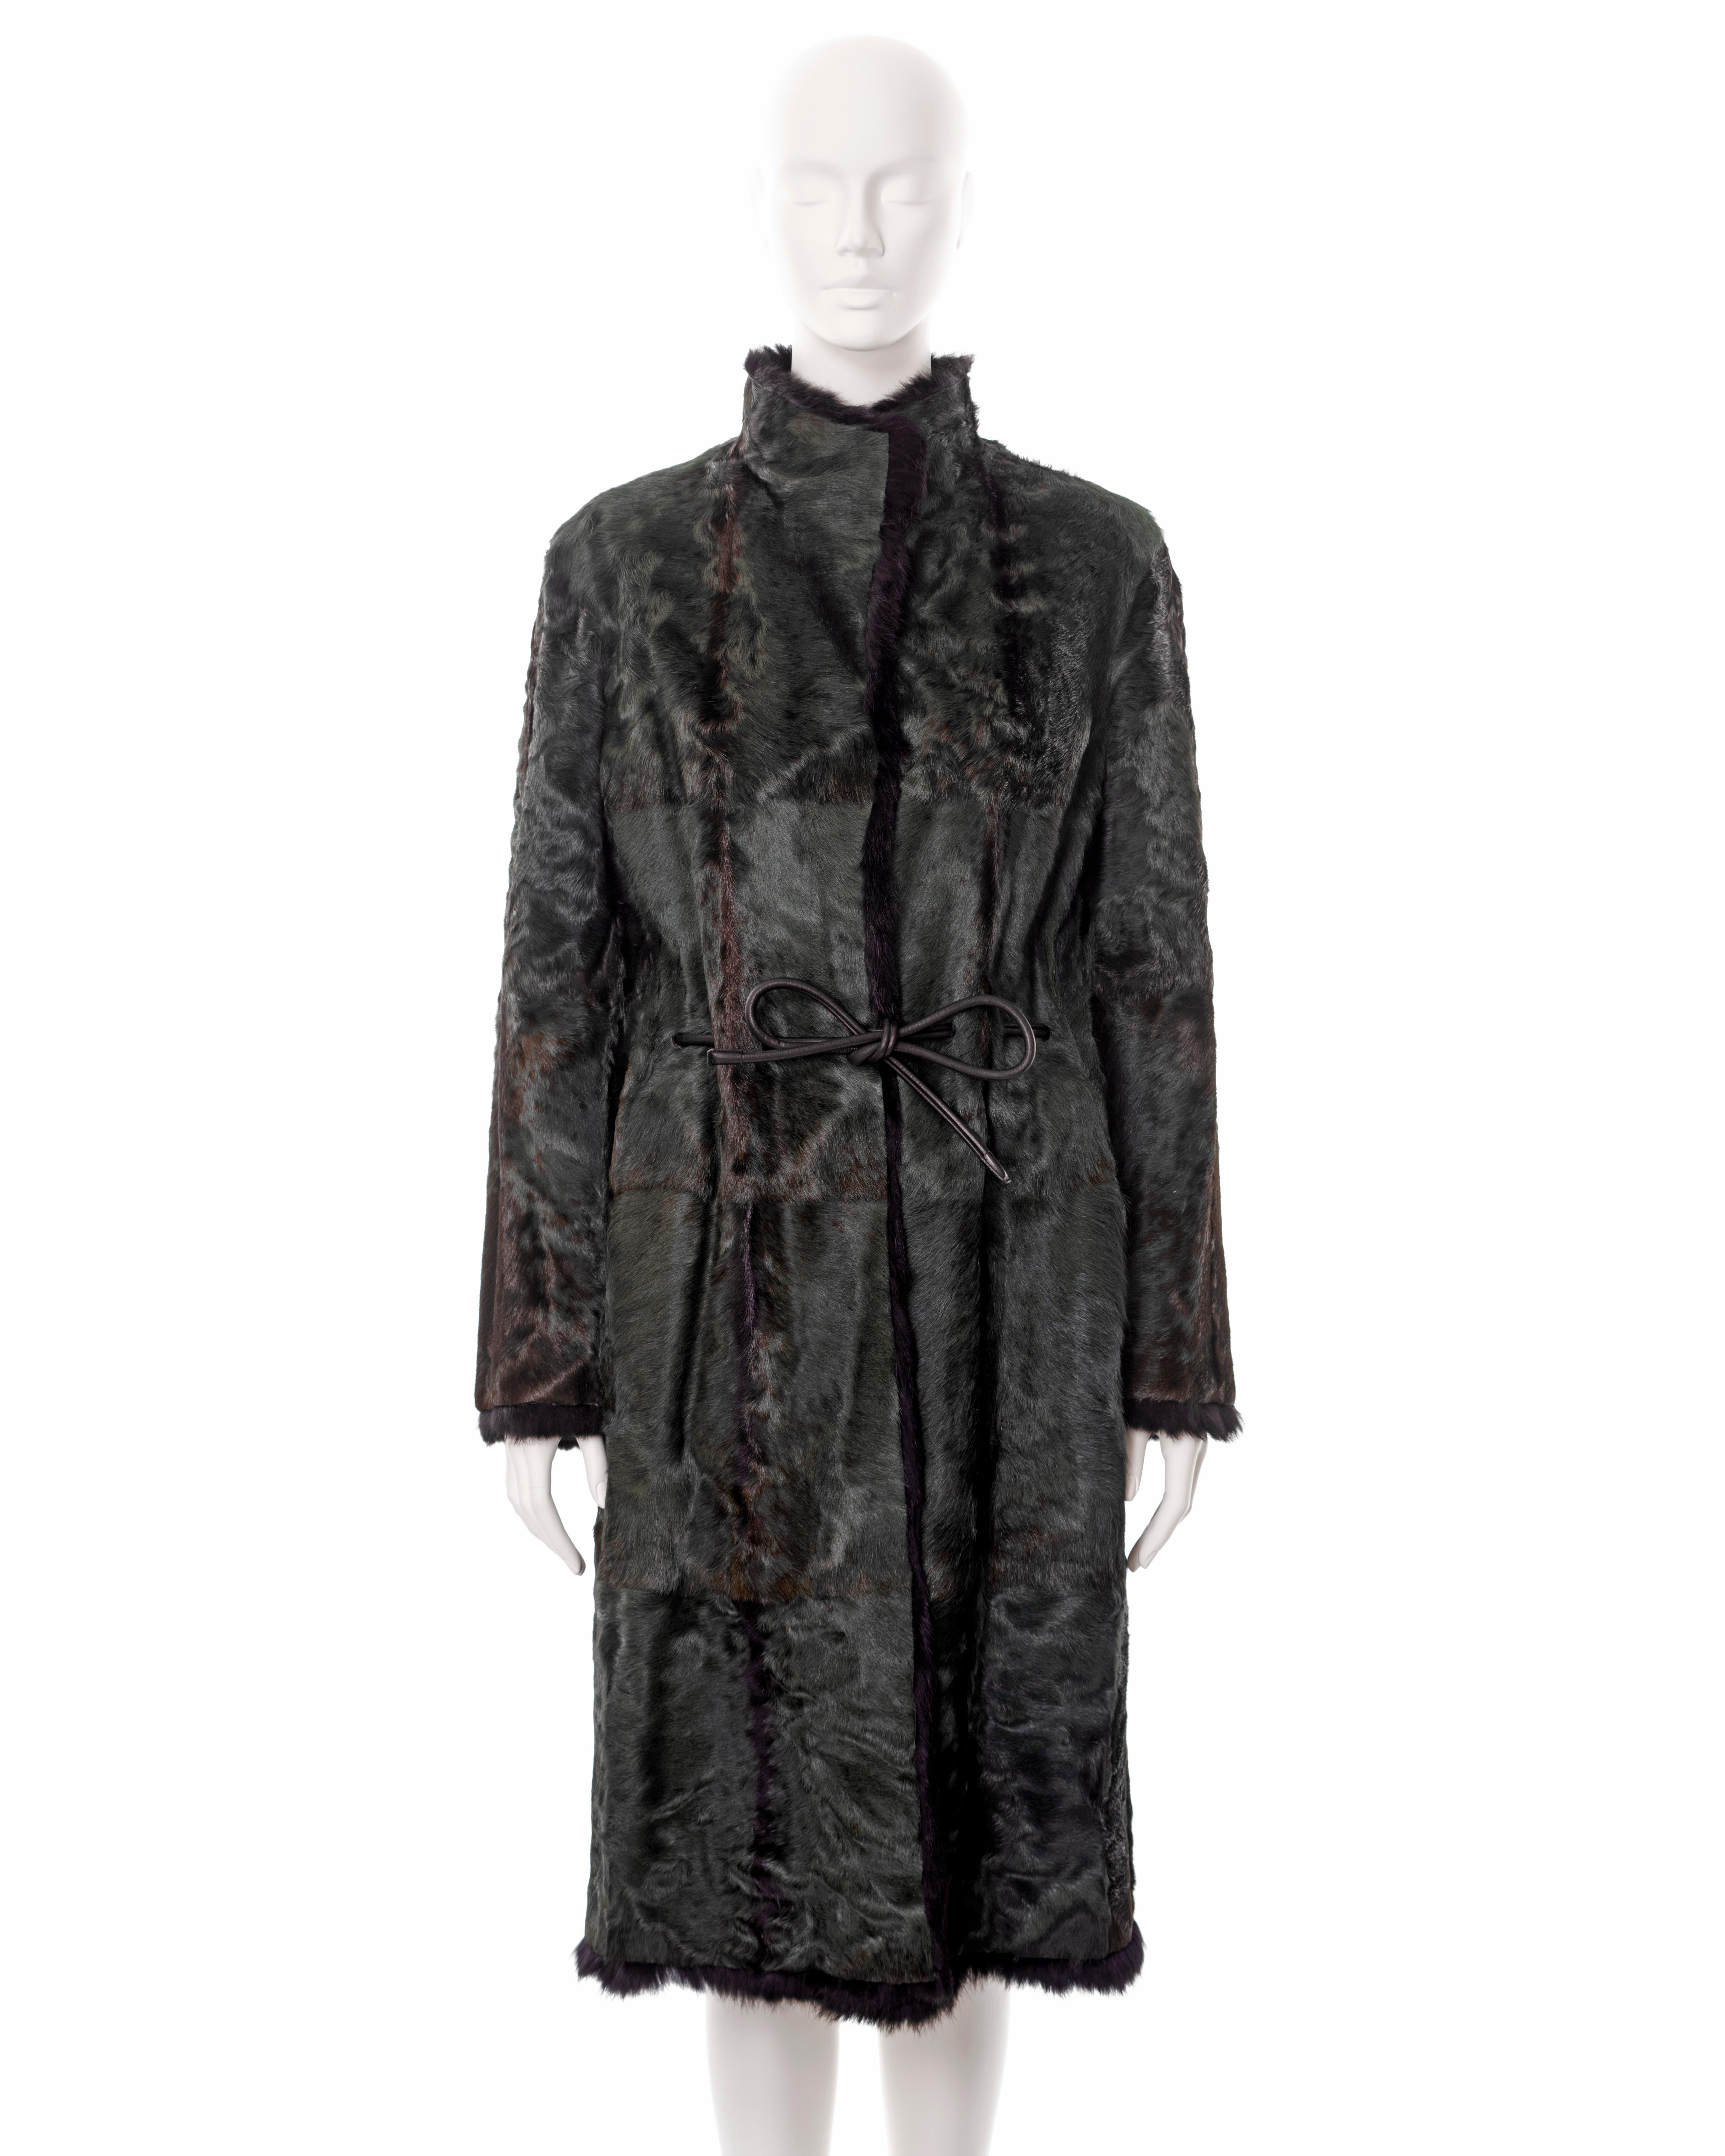 ▪ Gucci fur coat 
▪ Designed by Tom Ford
▪ Sold by One of a Kind Archive
▪ Fall-Winter 1999
▪ Constructed from bottle-green dyed Persian lamb and black rabbit fur 
▪ Black leather ribbon drawstring belt 
▪ Standing collar 
▪ Front hook closures 
▪